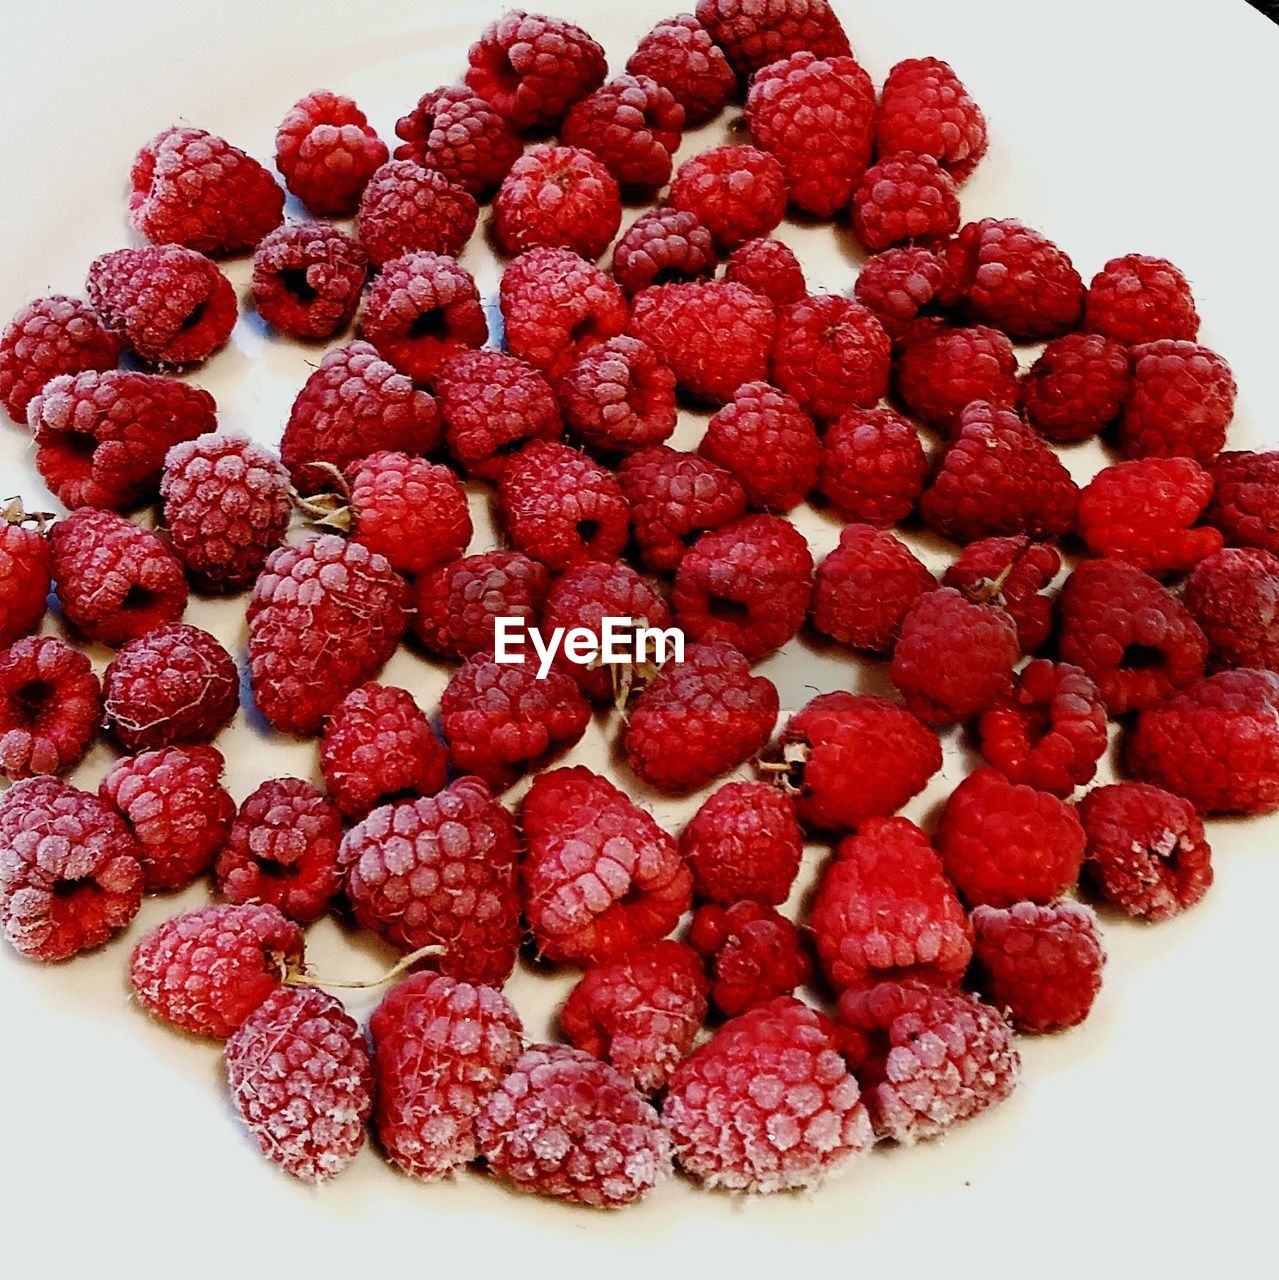 CLOSE-UP OF STRAWBERRIES IN PLATE